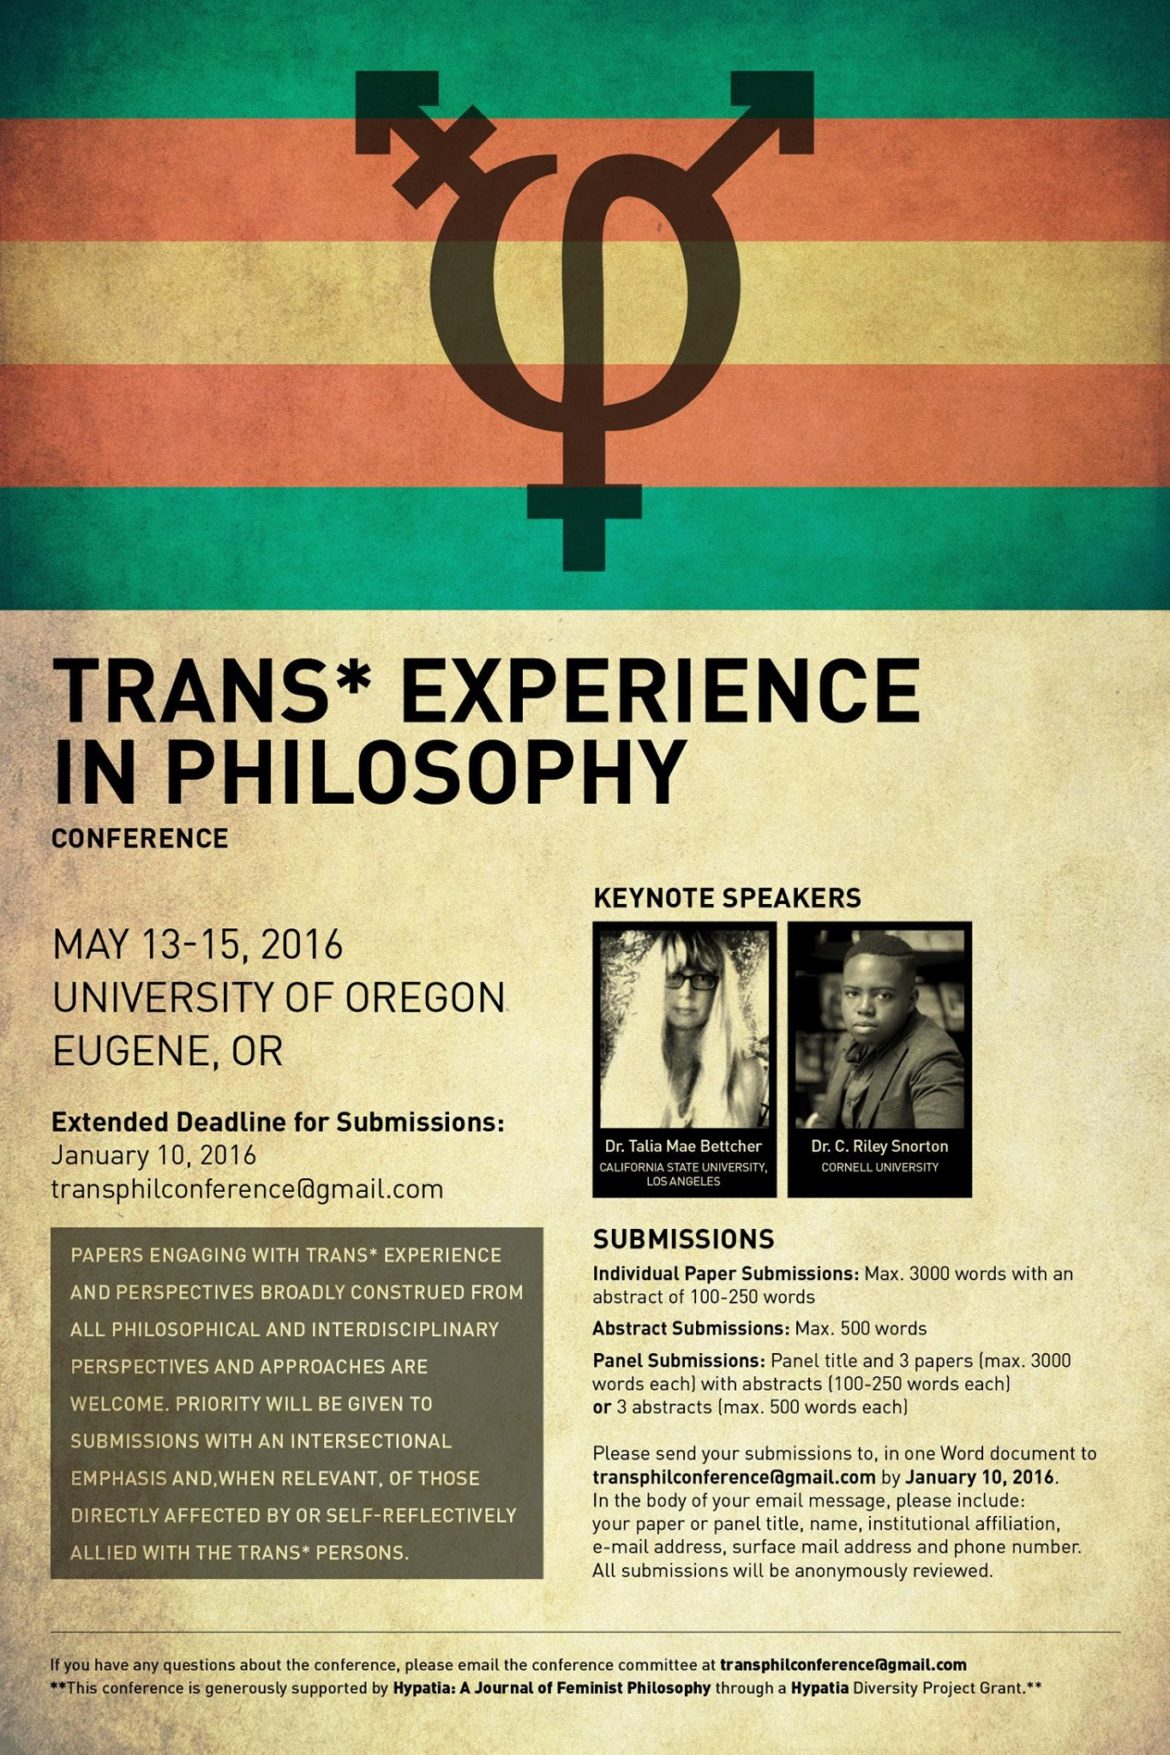 Conference flyer for the Trans* Experience in Philosophy Conference in May 2016.